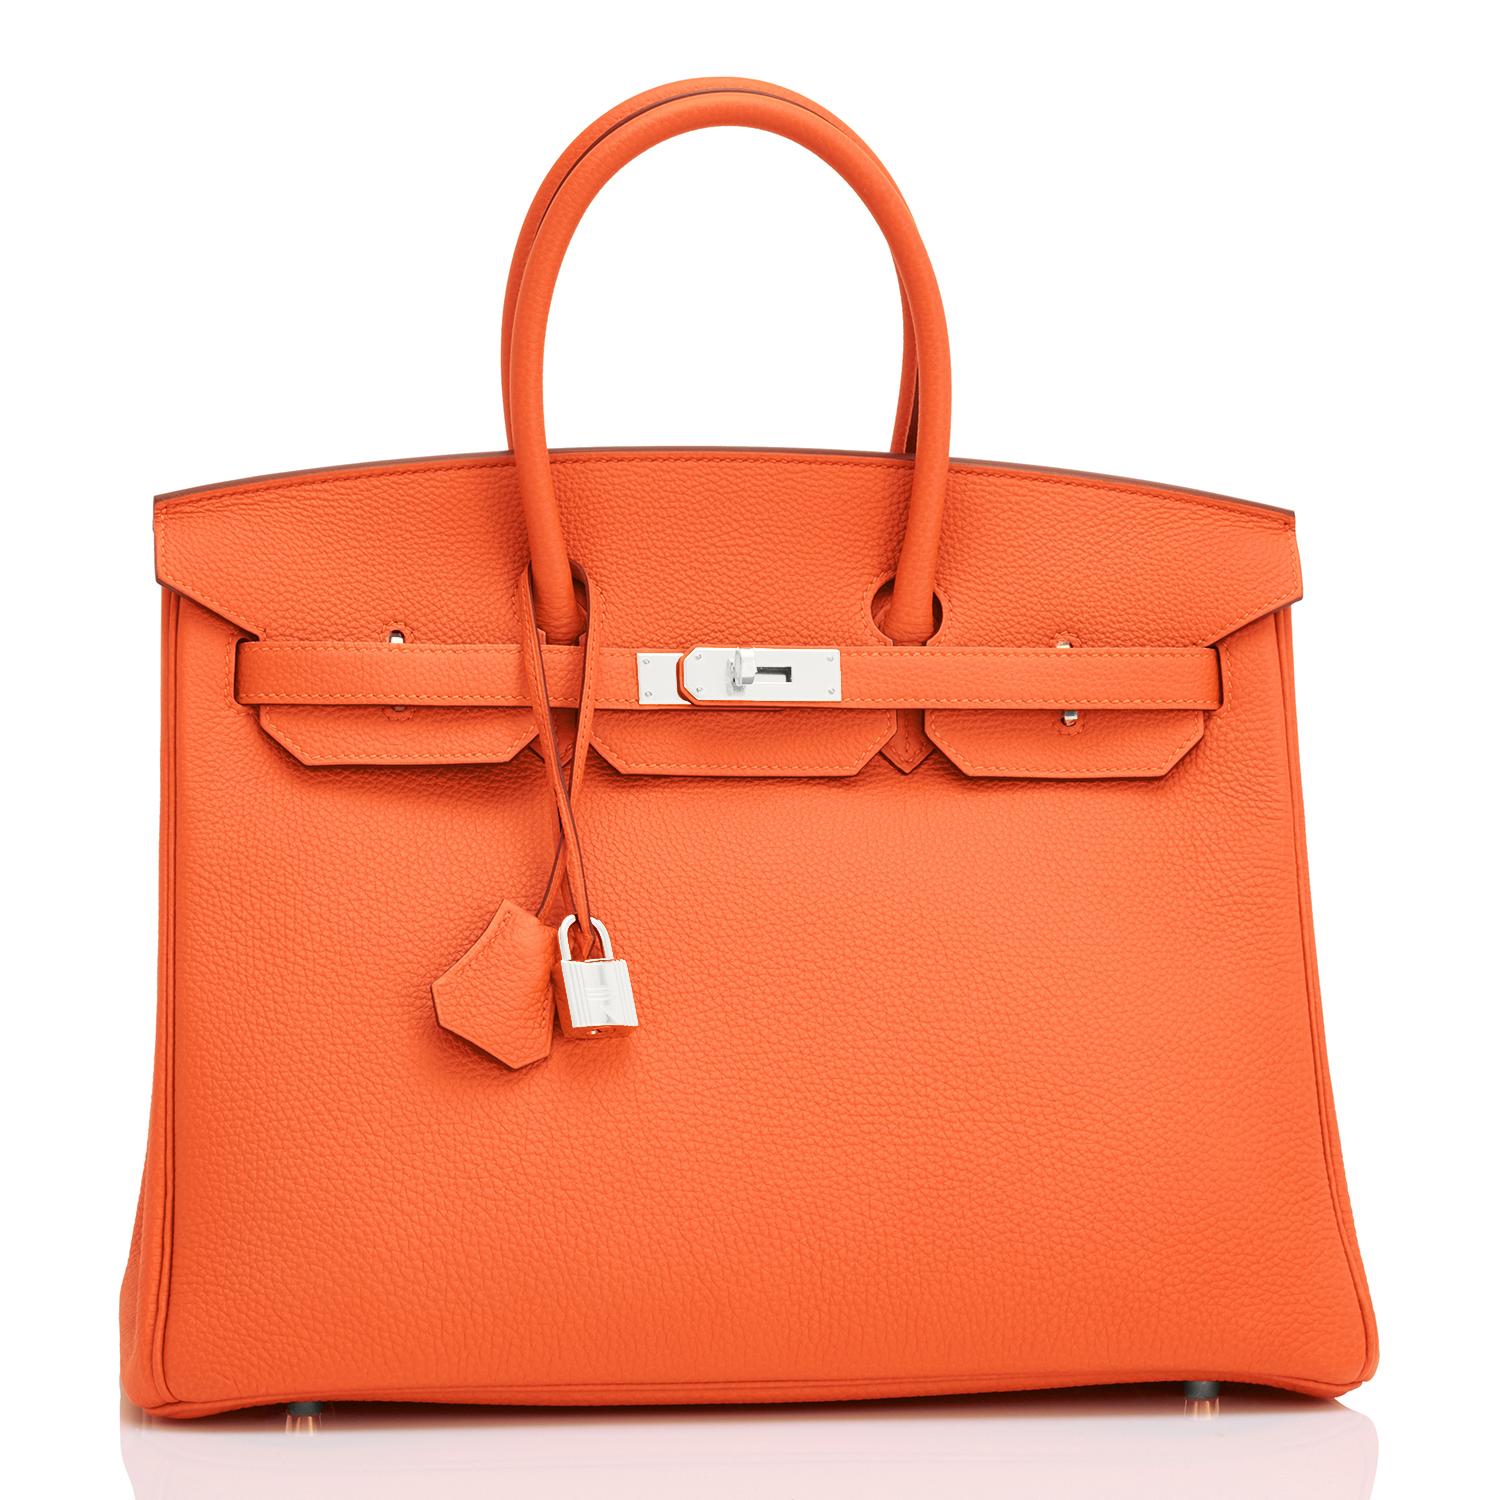 Hermes Birkin 35 Orange Feu Togo Palladium Hardware NEW
Spectacularly gorgeous combination! 
Feu Orange is very coveted and rare to find now.
Brand New in Box. Store fresh. Pristine condition (with plastic on hardware).
Perfect gift! Comes with